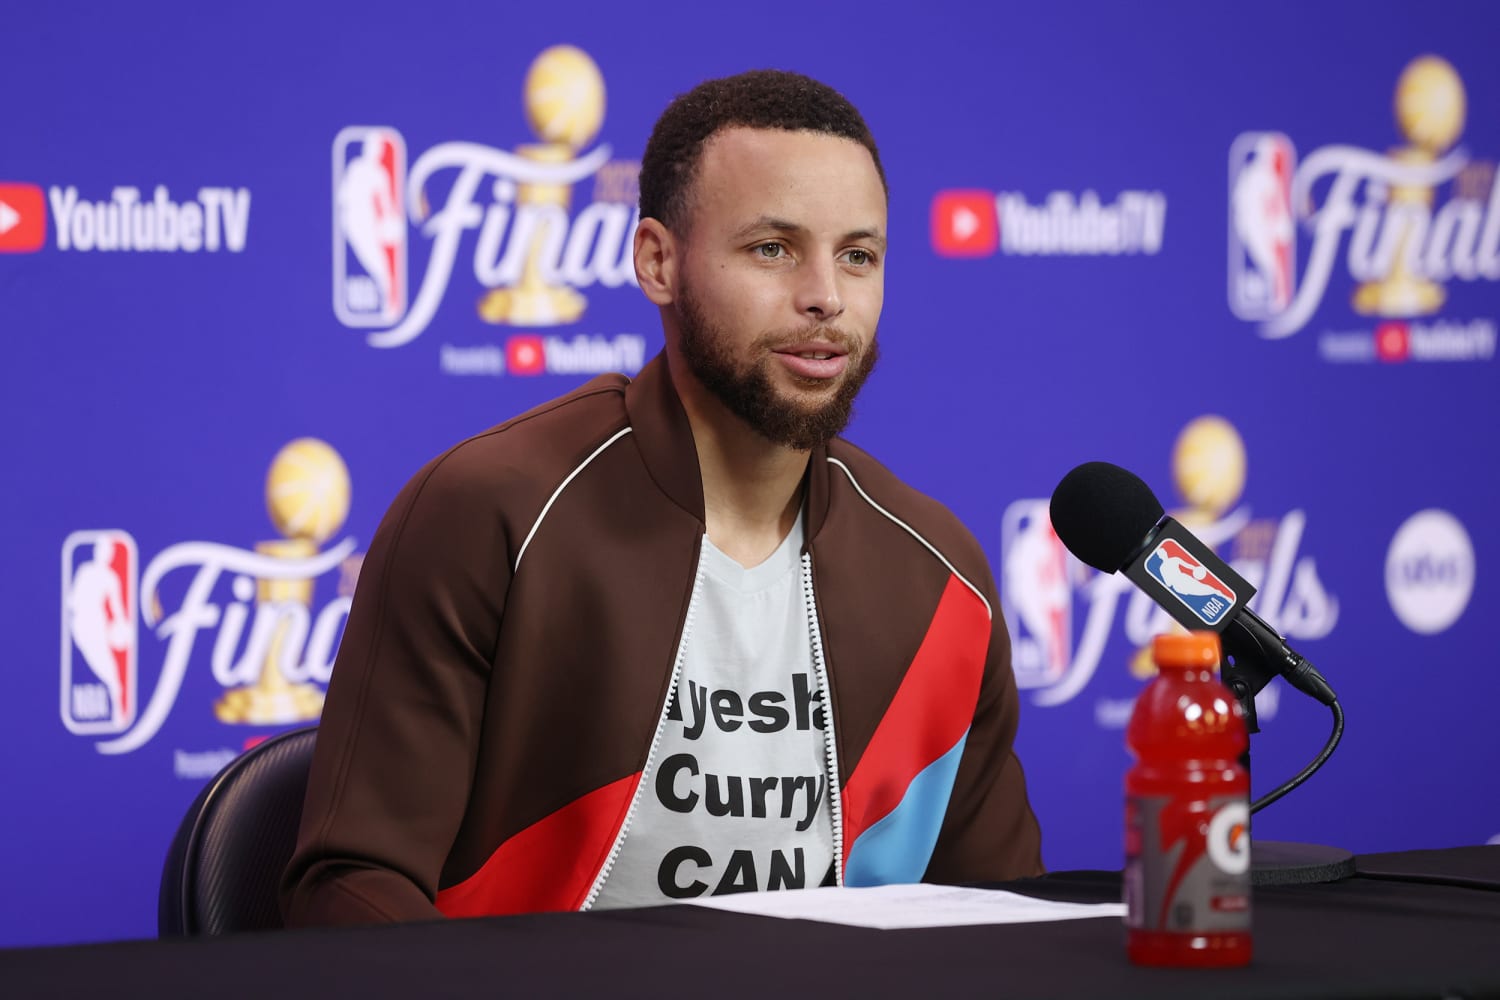 Steph Curry hilariously mocks reporters who said he'd win 'zero' titles